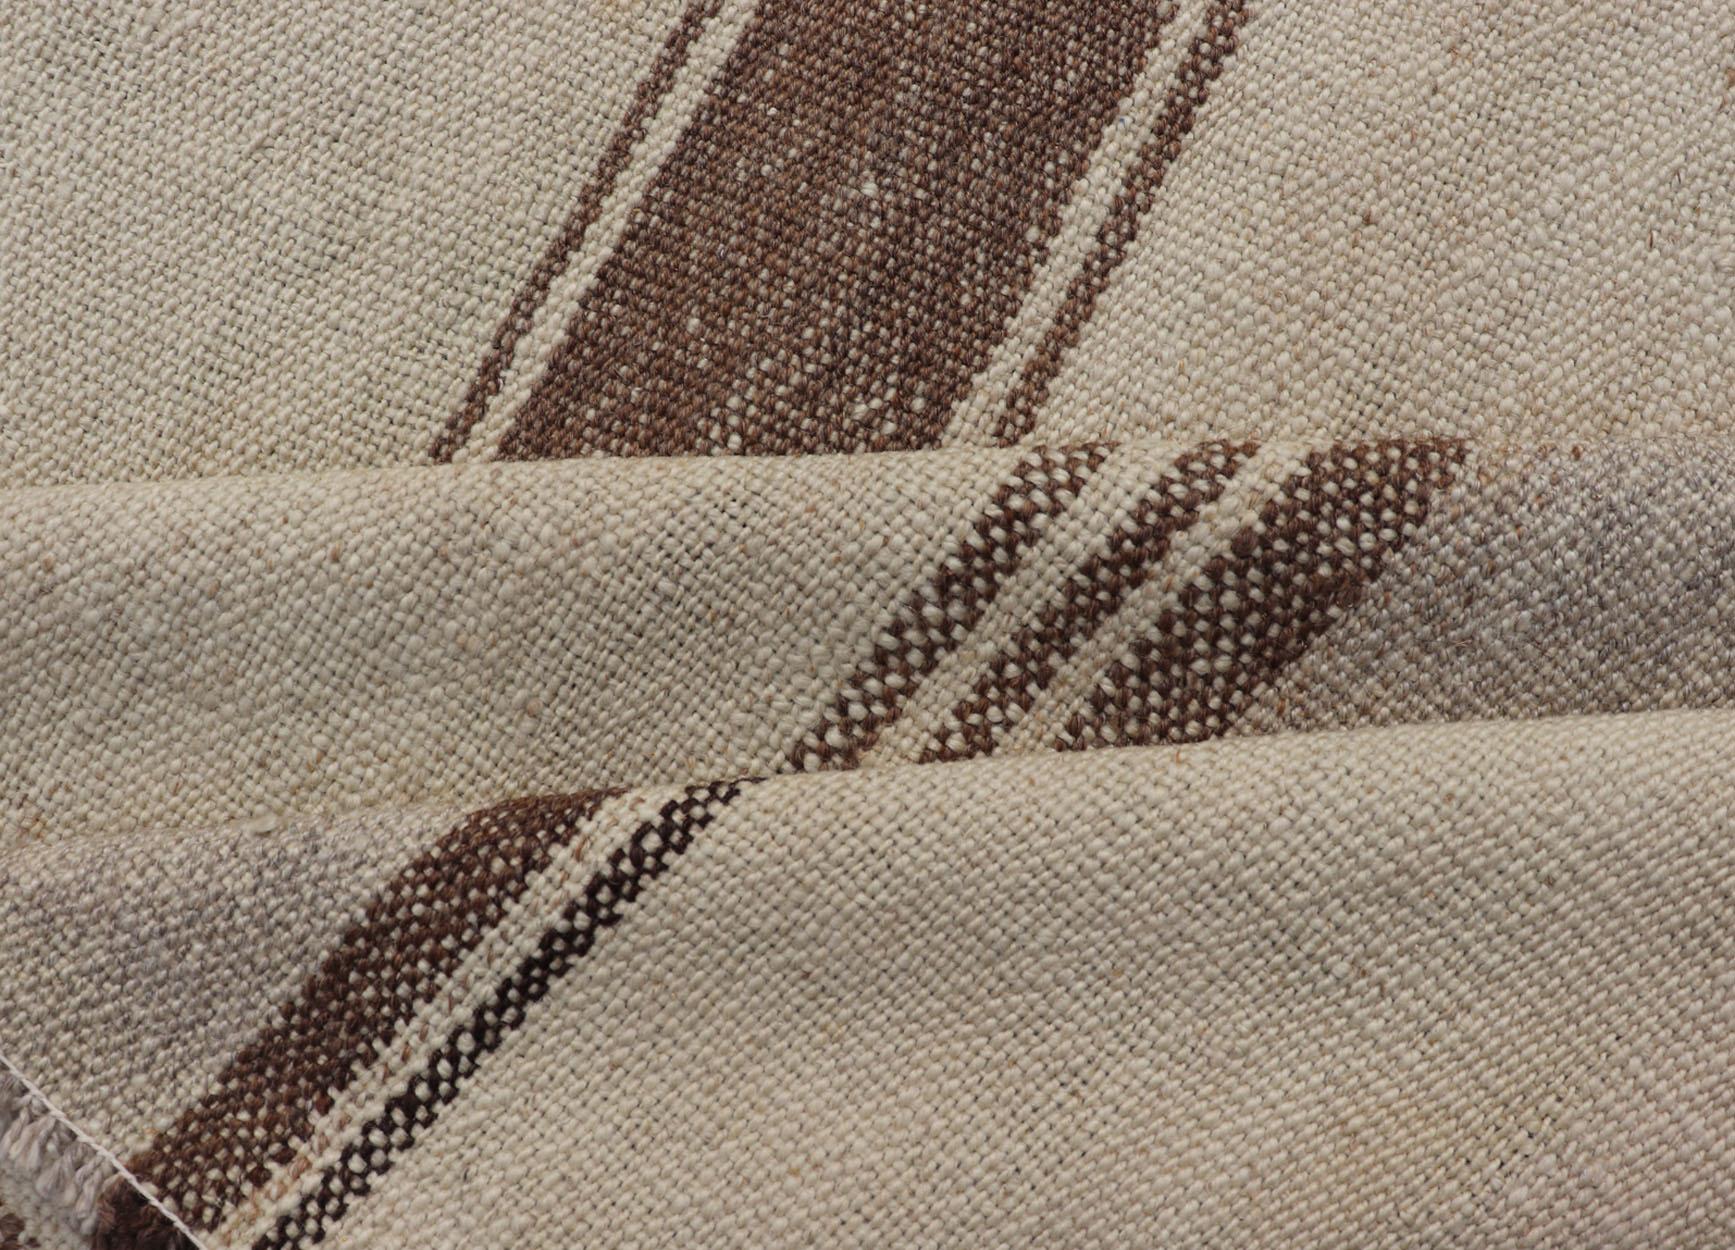 Vintage Turkish Kilim with Stripes in Tan, Gray, Taupe, Cream & Brown In Excellent Condition For Sale In Atlanta, GA